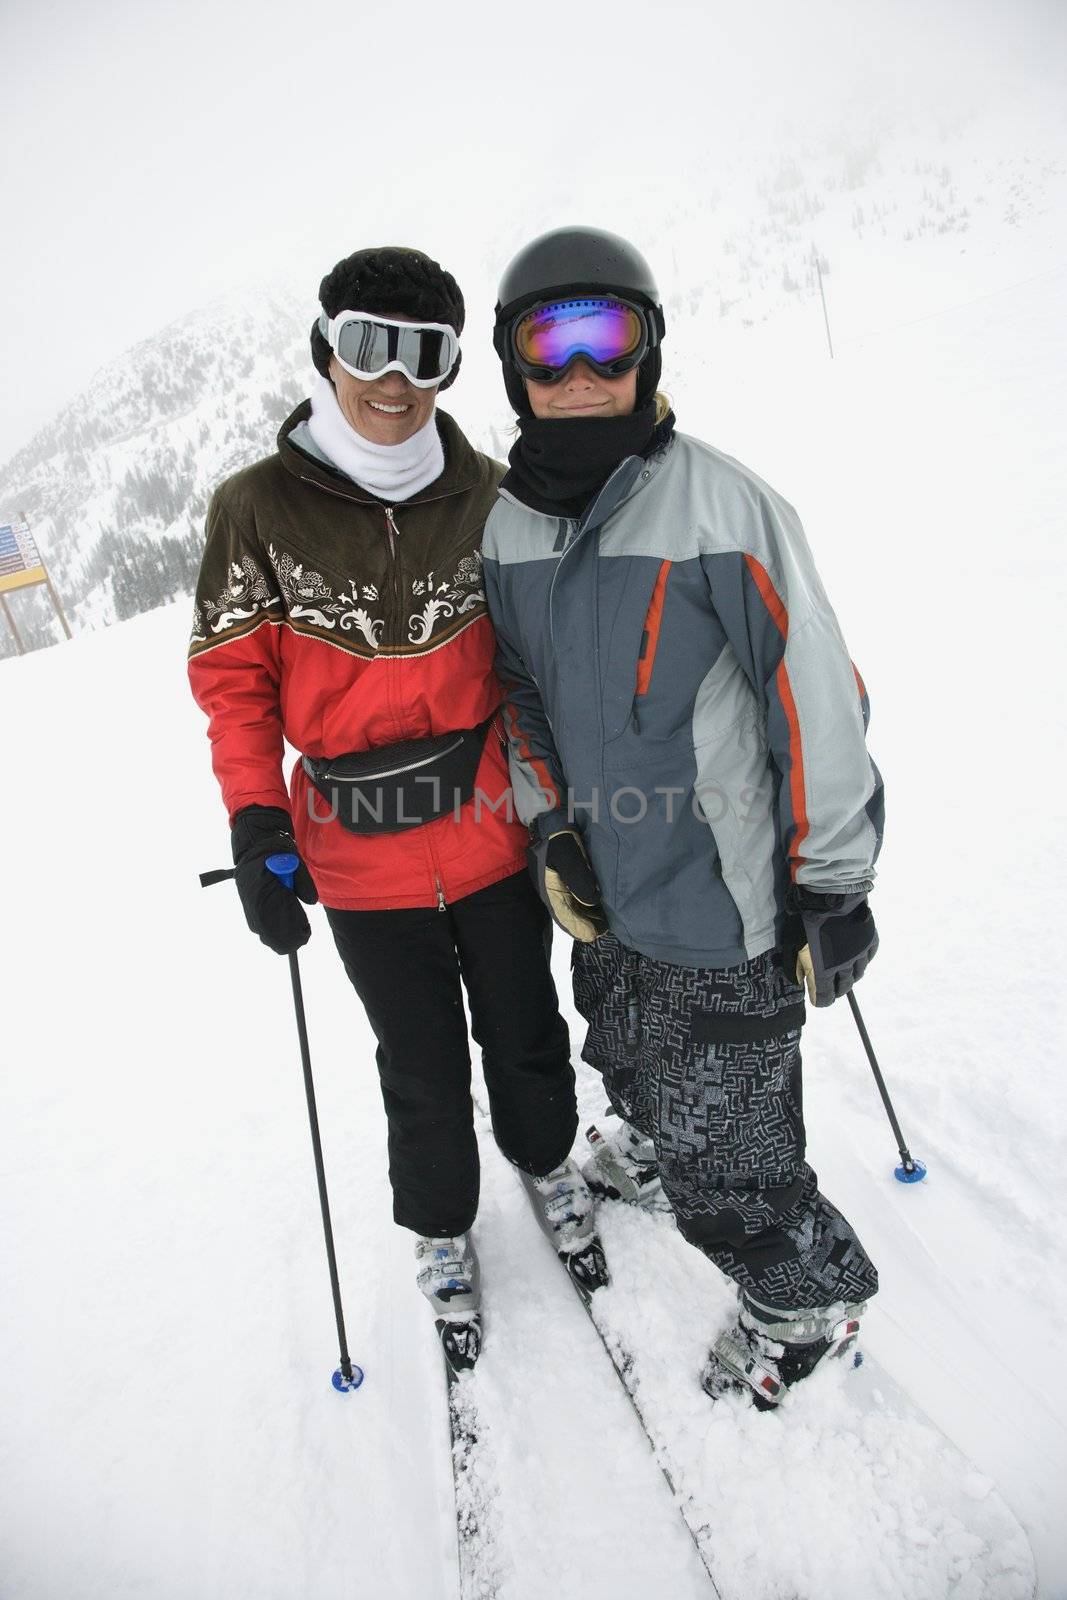 Middle-aged mother with teenage son on snowy ski slopes.